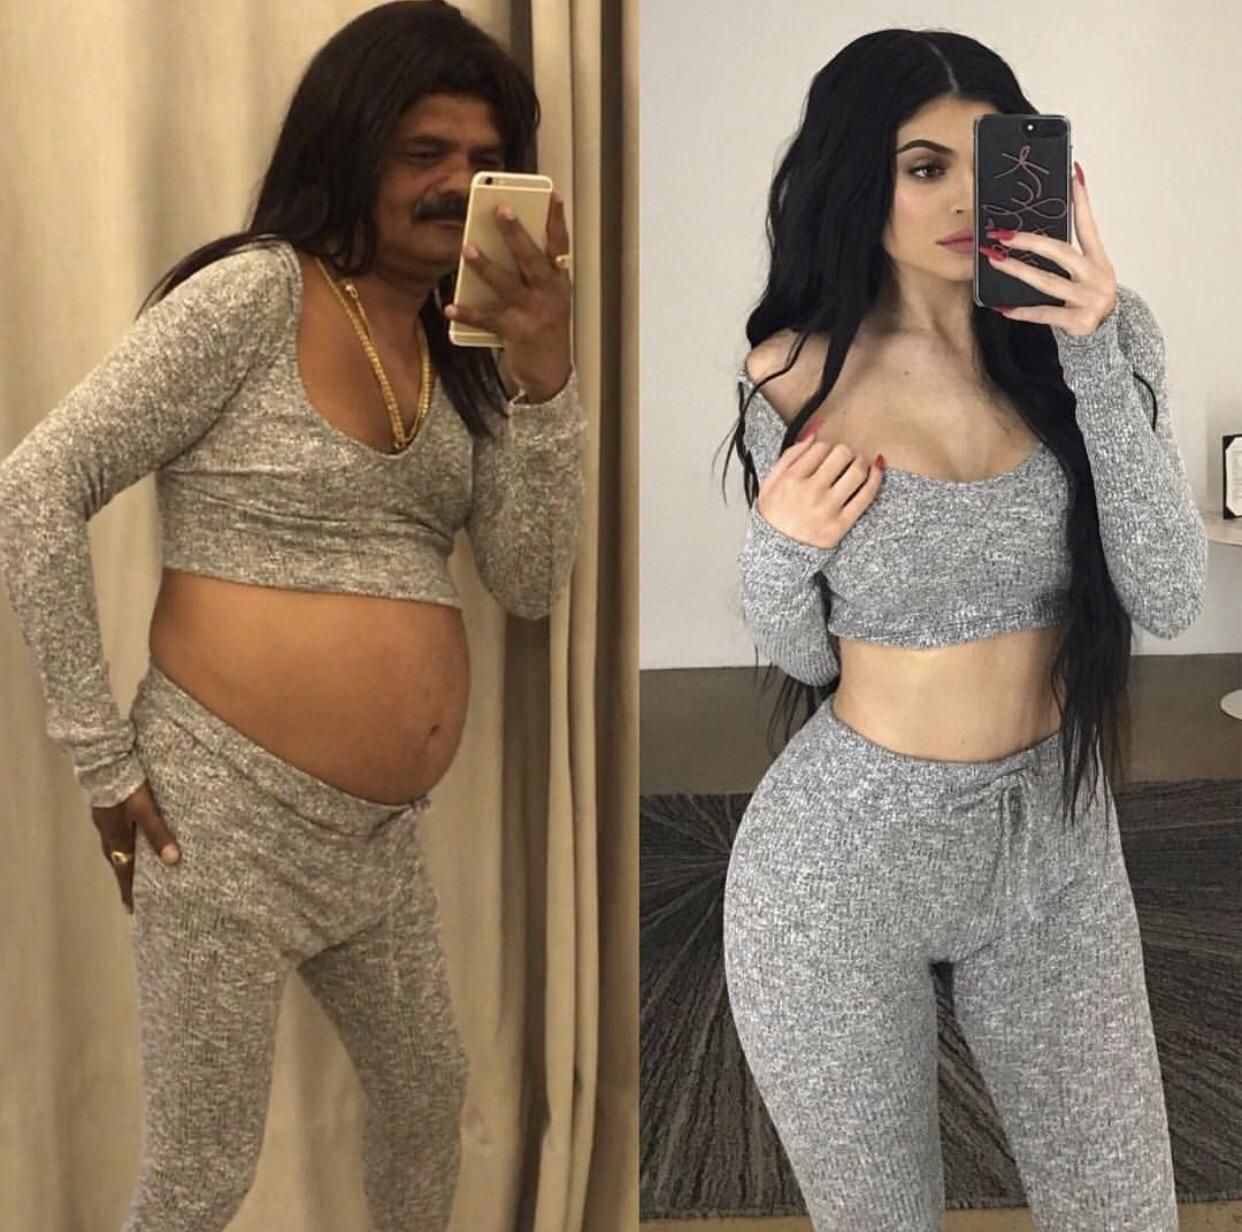 Rare pic of Kylie Jenner before giving birth